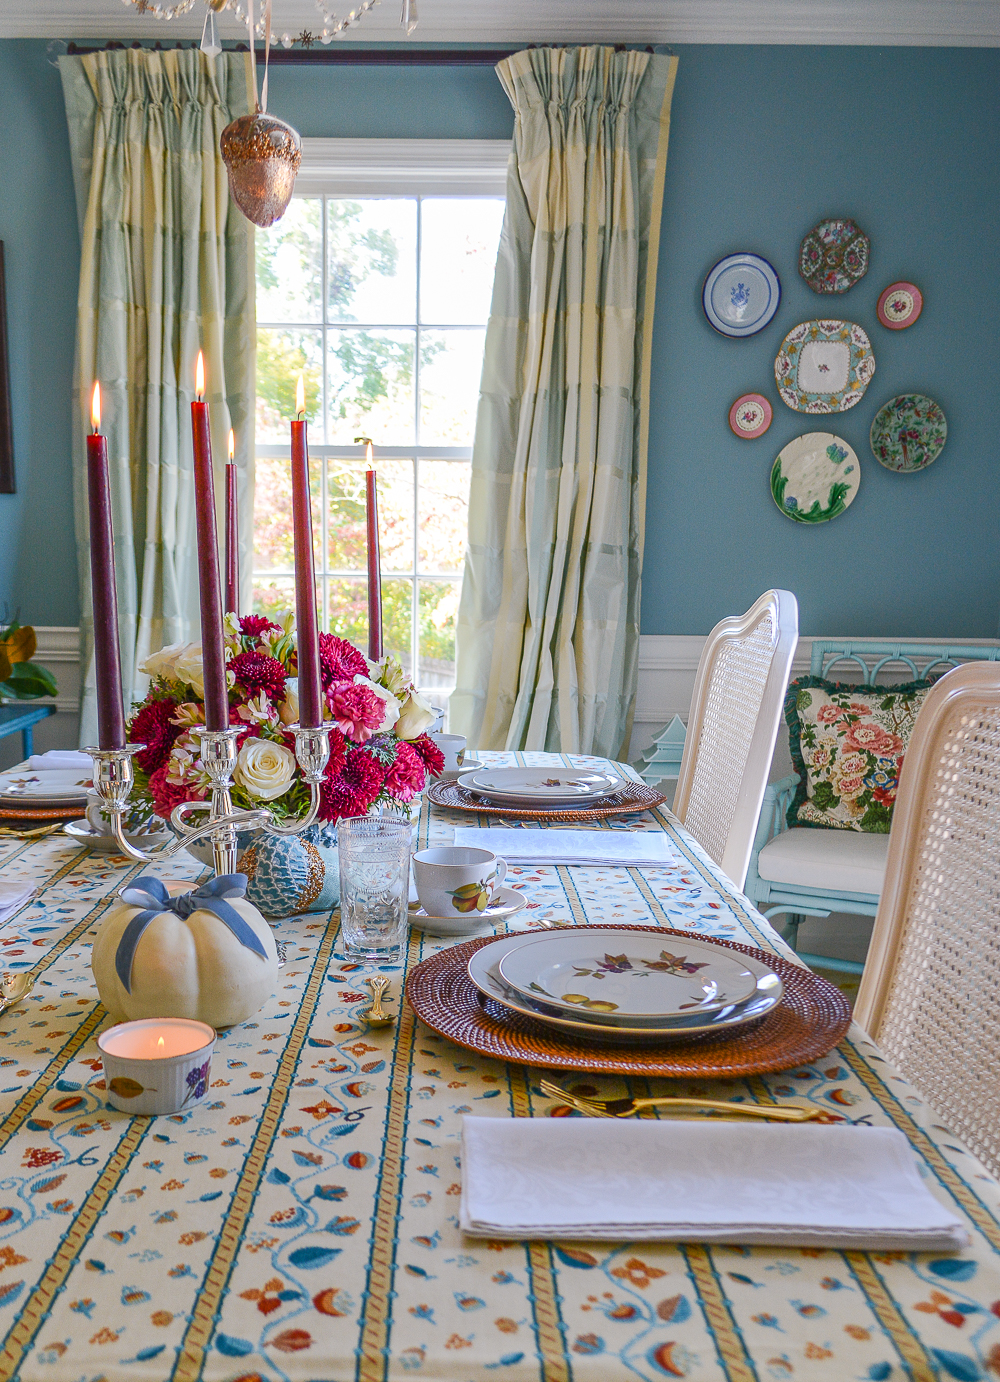 Set a refined Thanksgiving table in blue and brown with Grandmillennial vibes using Evesham dishes, Schumacher Sunnyside Vine, and antique heirlooms